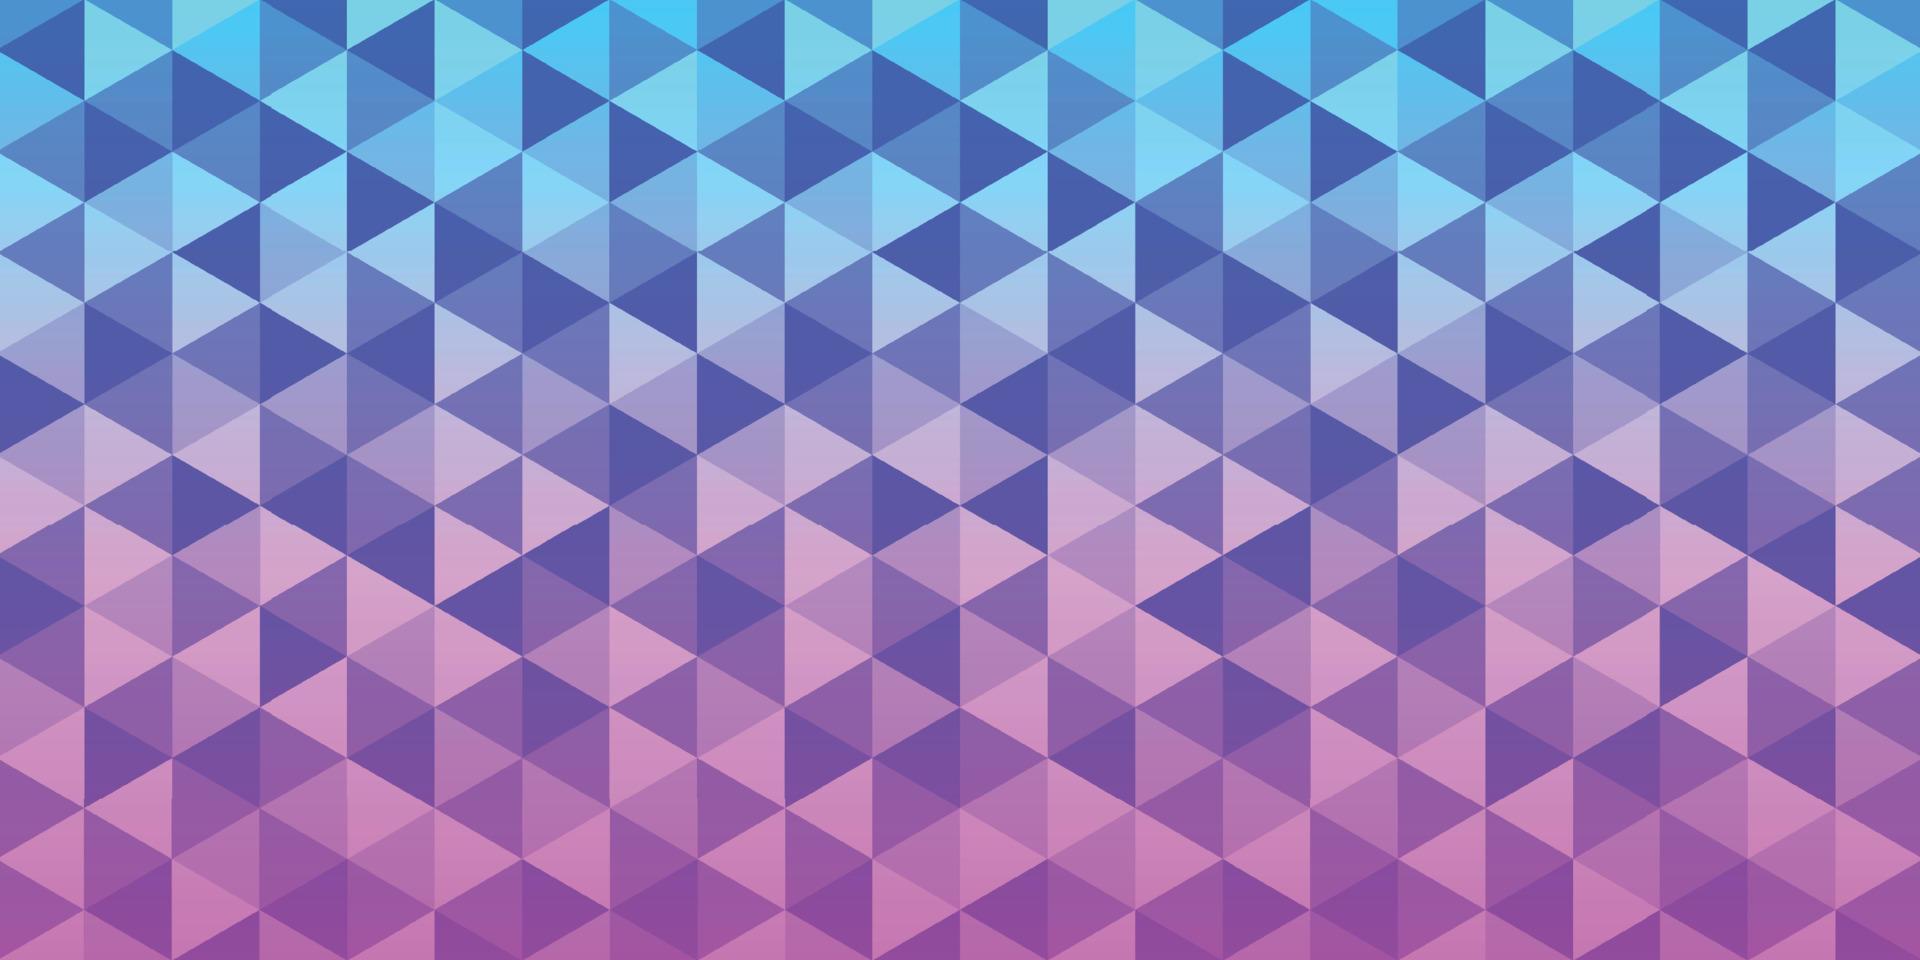 blue and purple gradient triangular pattern, abstract geometric polygonal background vector